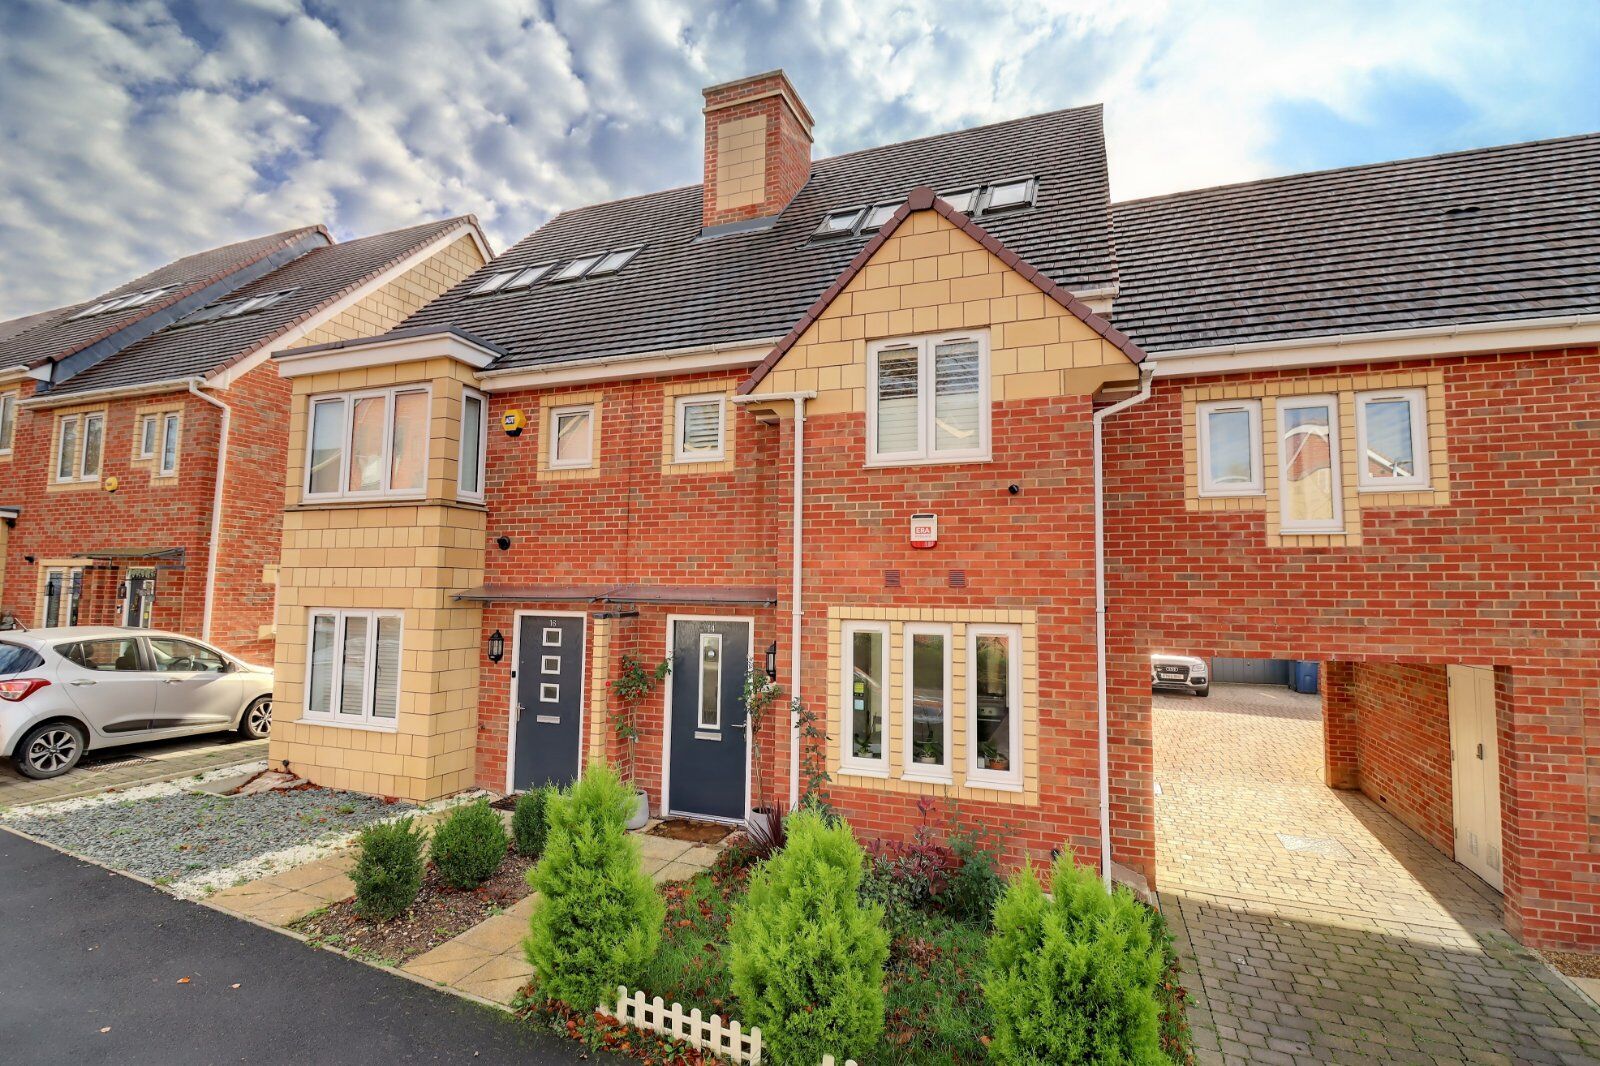 4 bedroom semi detached house for sale Kennedy Avenue, High Wycombe, HP11, main image